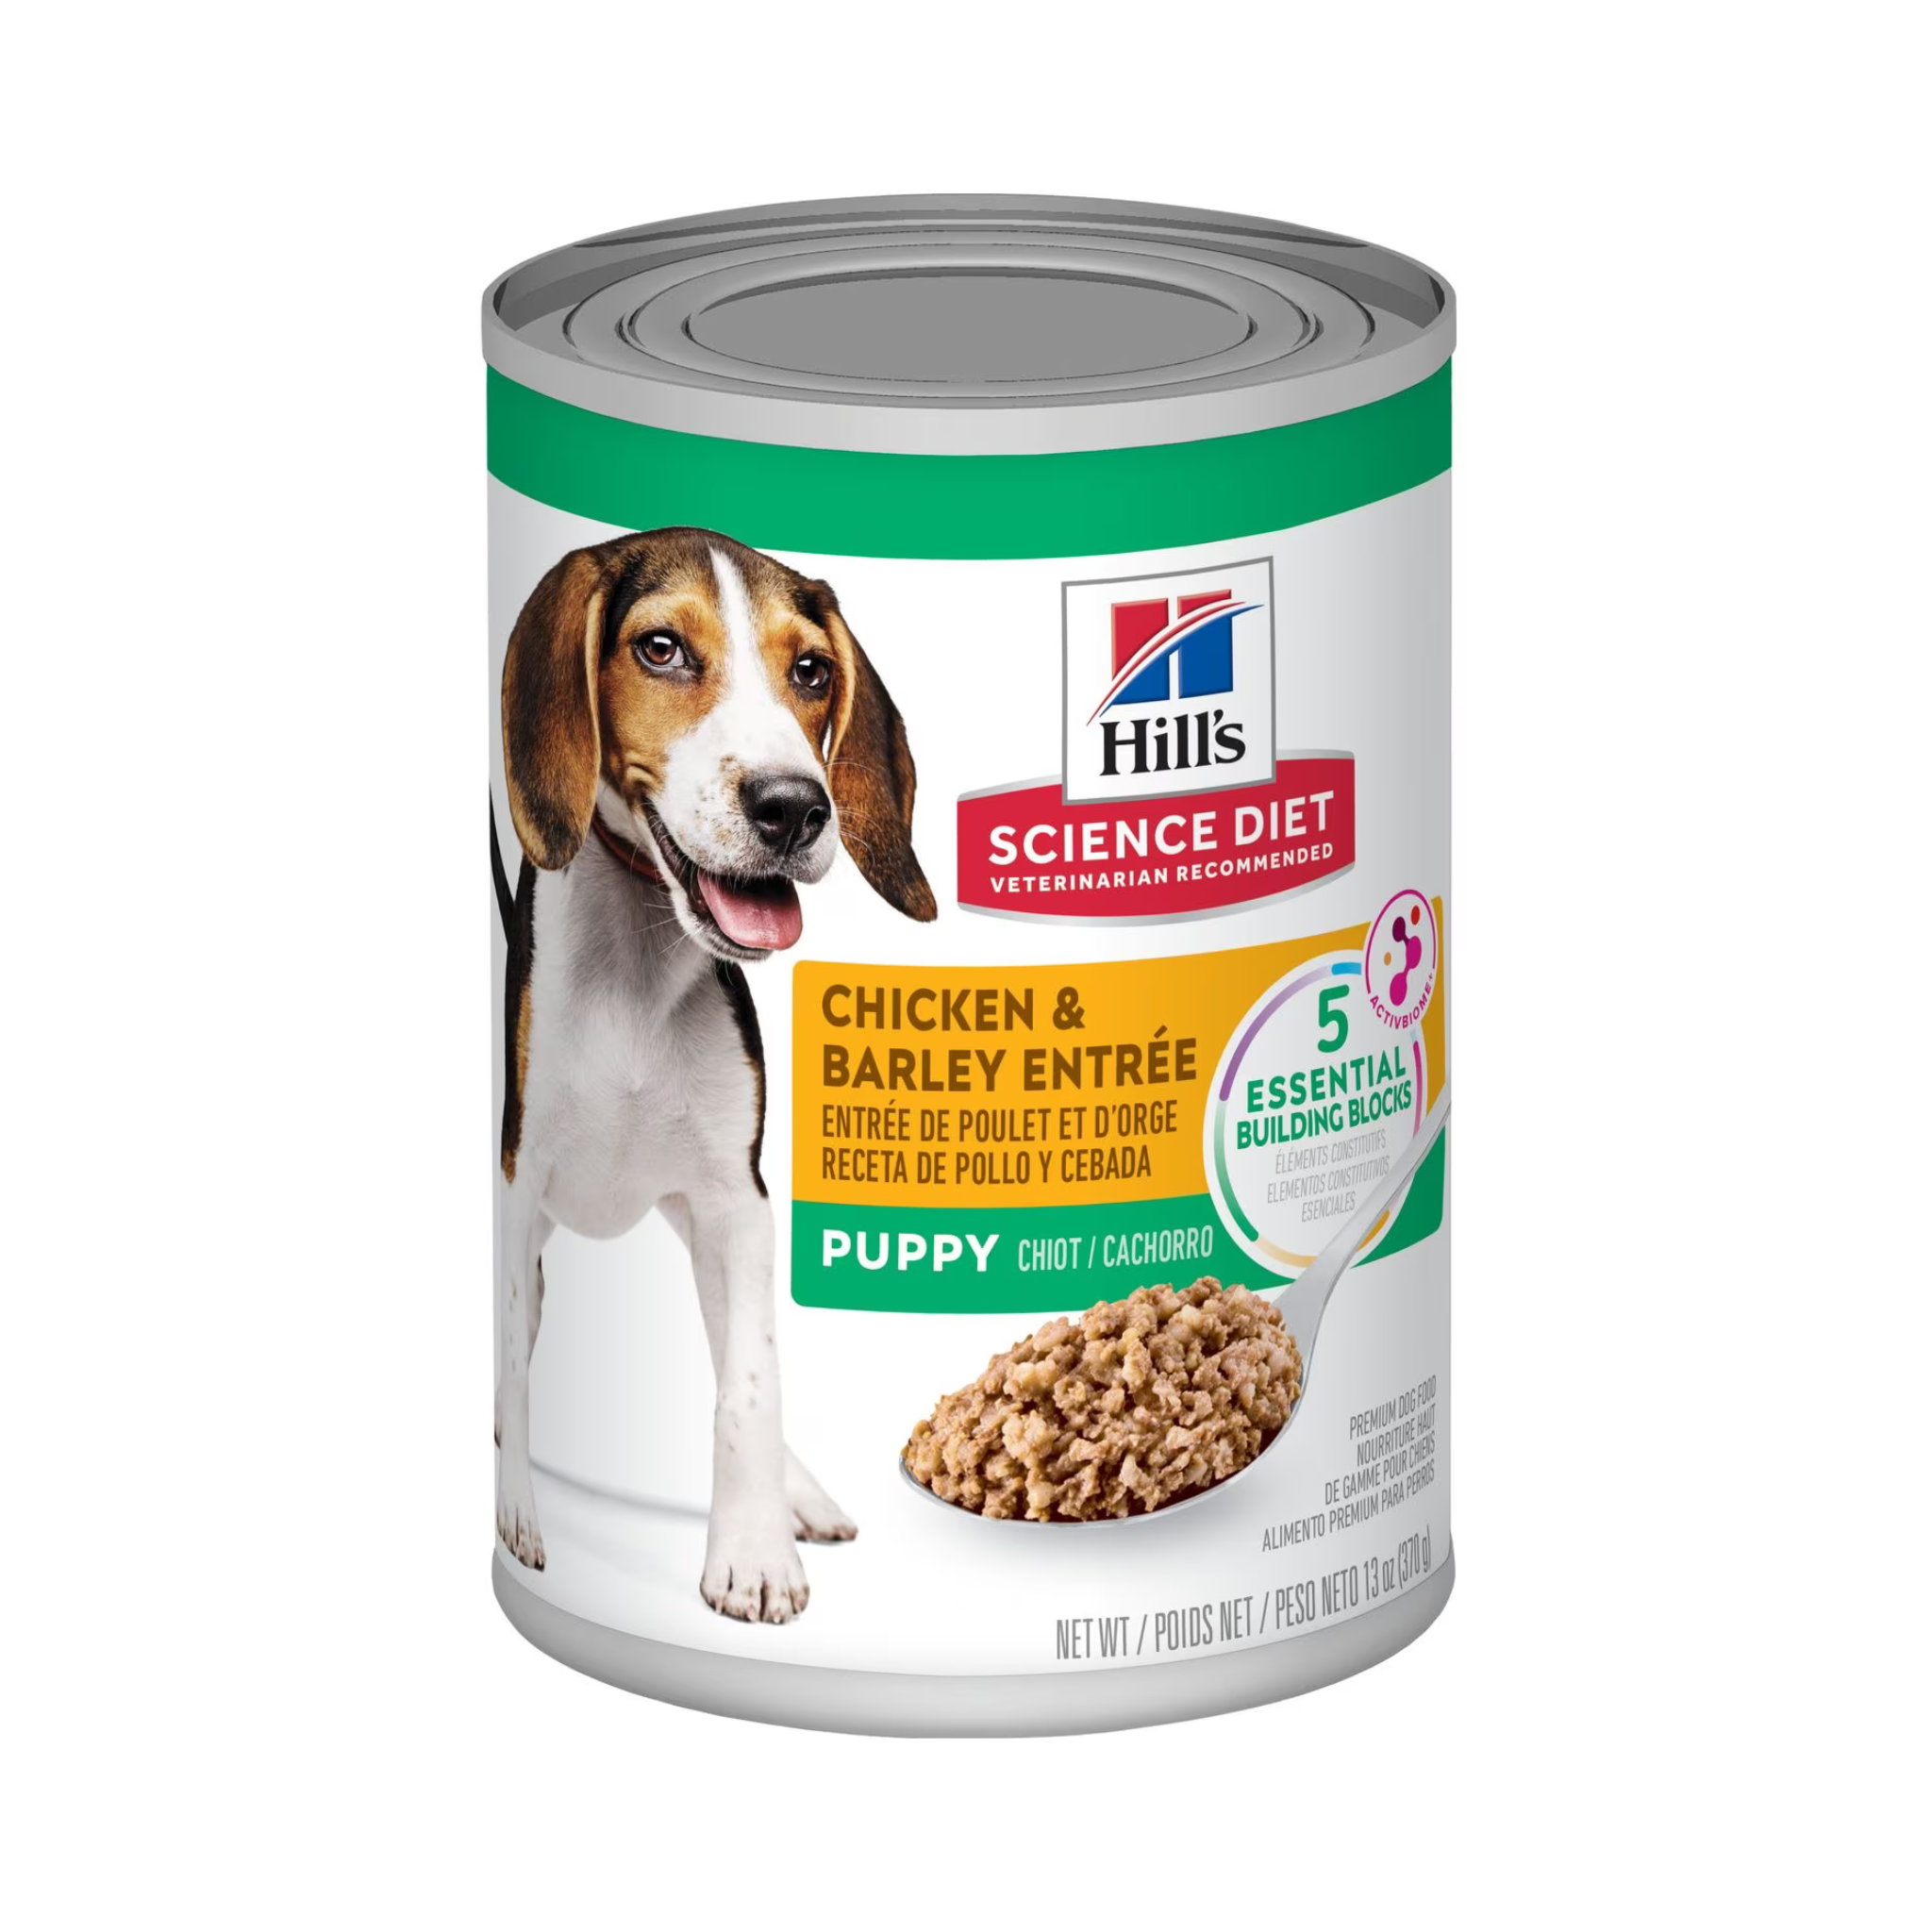 Hill's Science Diet Chicken & Barley Entrée Puppy Dog Canned